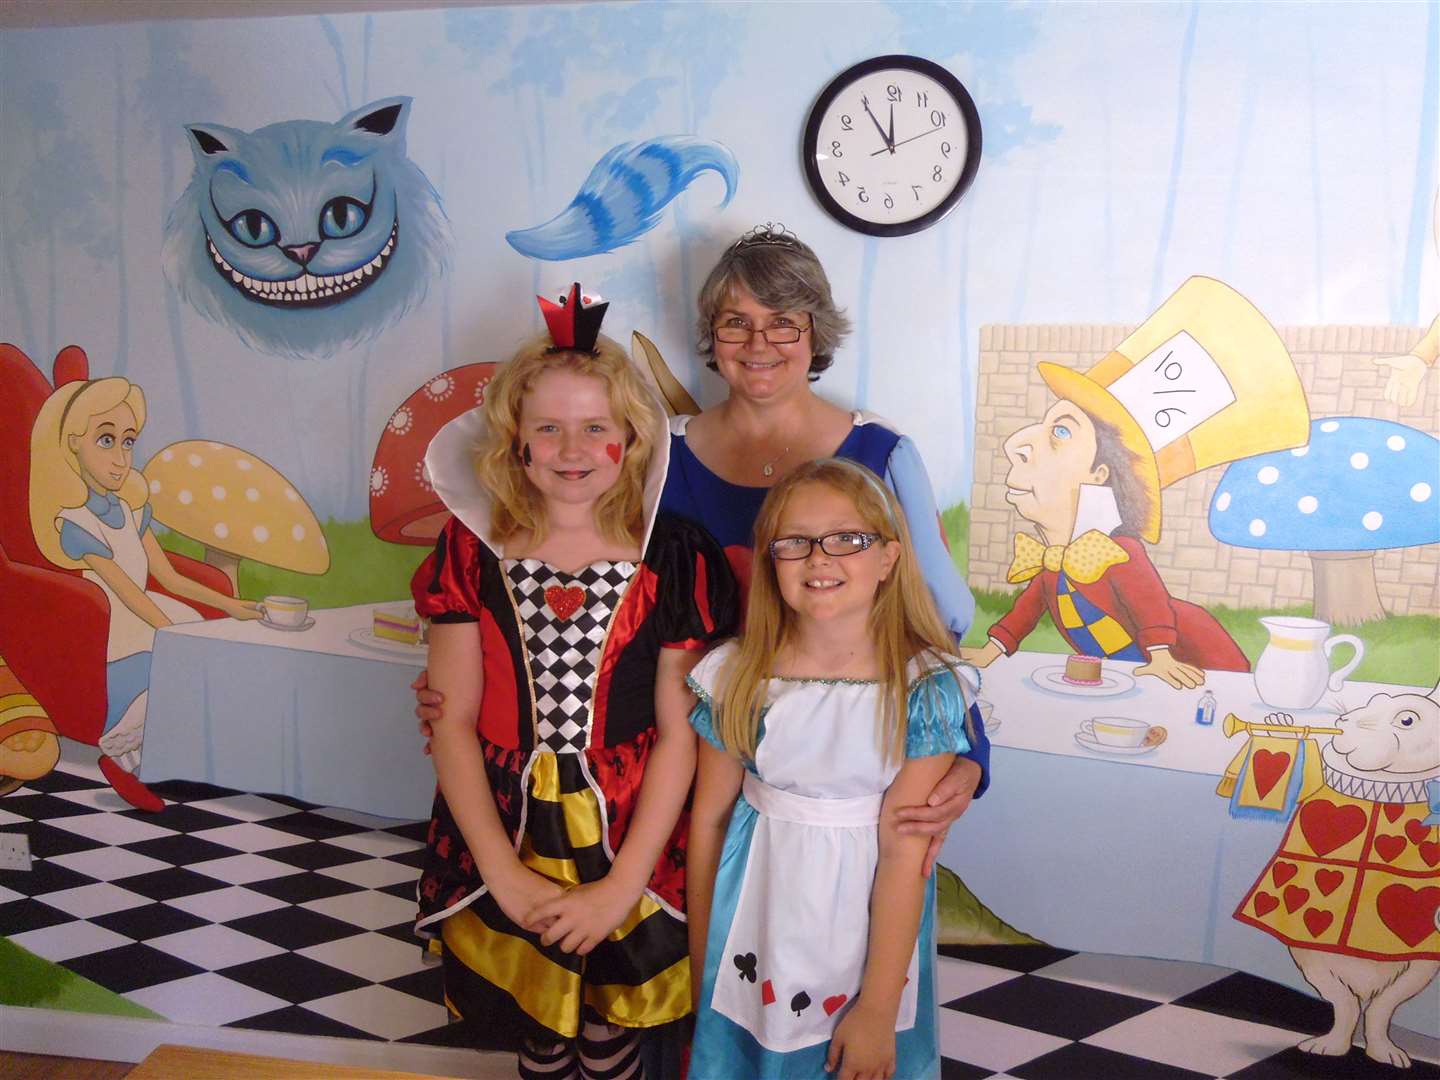 Past times: opening of the Mad Hatter's Tea Room in Baileys Coffee Shop in Sittingbourne High Street with owner Sally Reeve, customers Danielle and Phoebe Hatt - and the original back-to-front clock